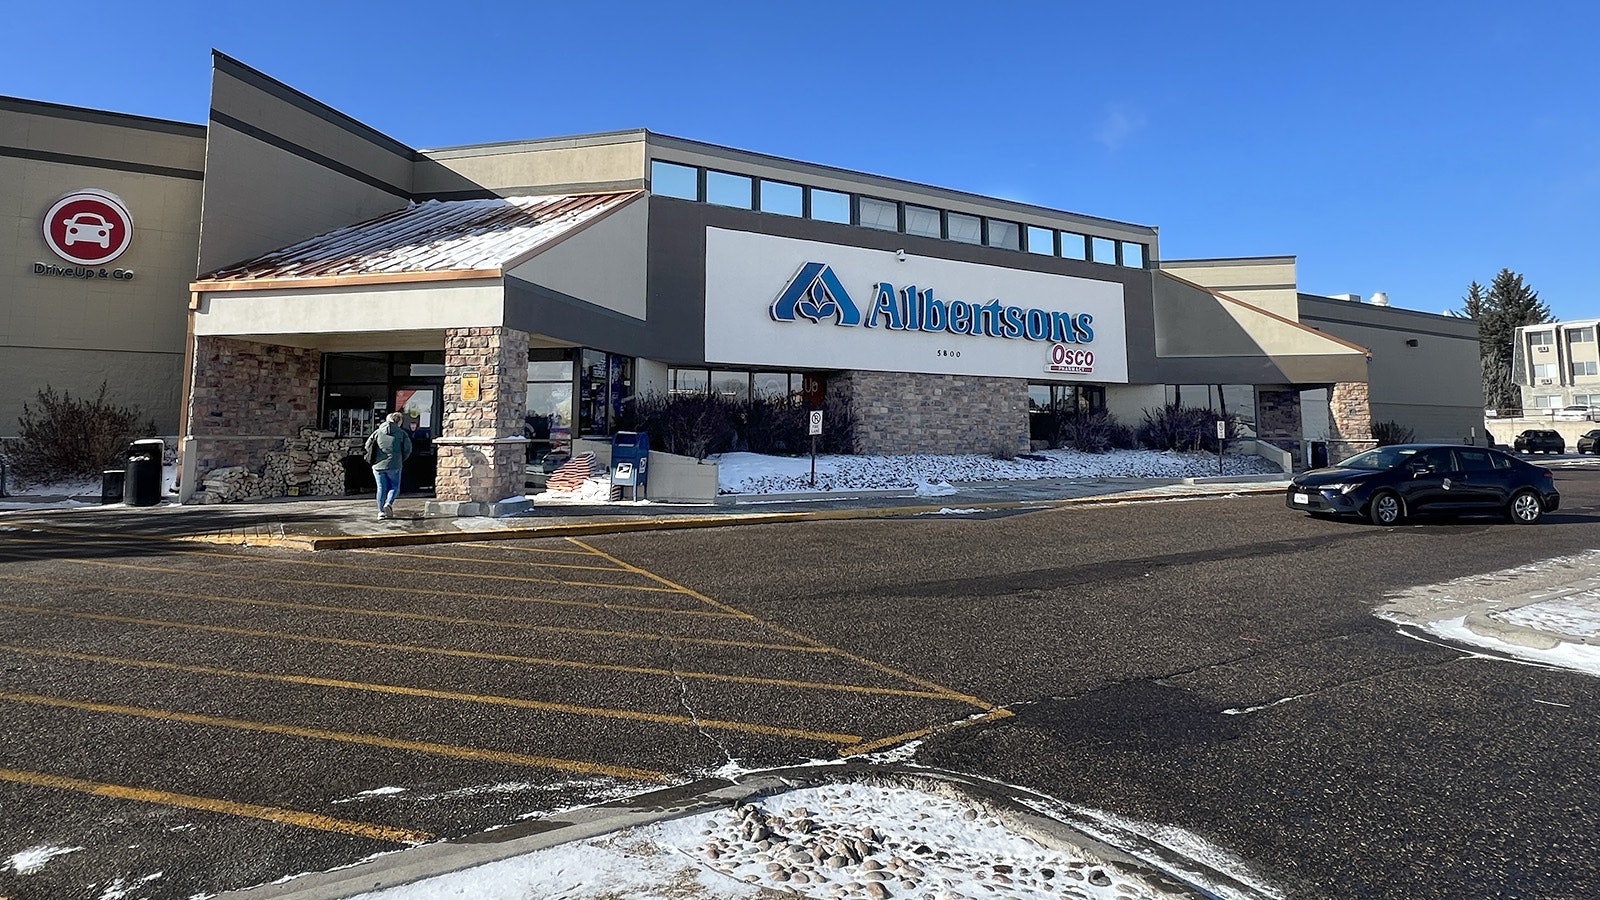 The Albertsons grocery store at 5800 Yellowstone Road in Cheyenne.